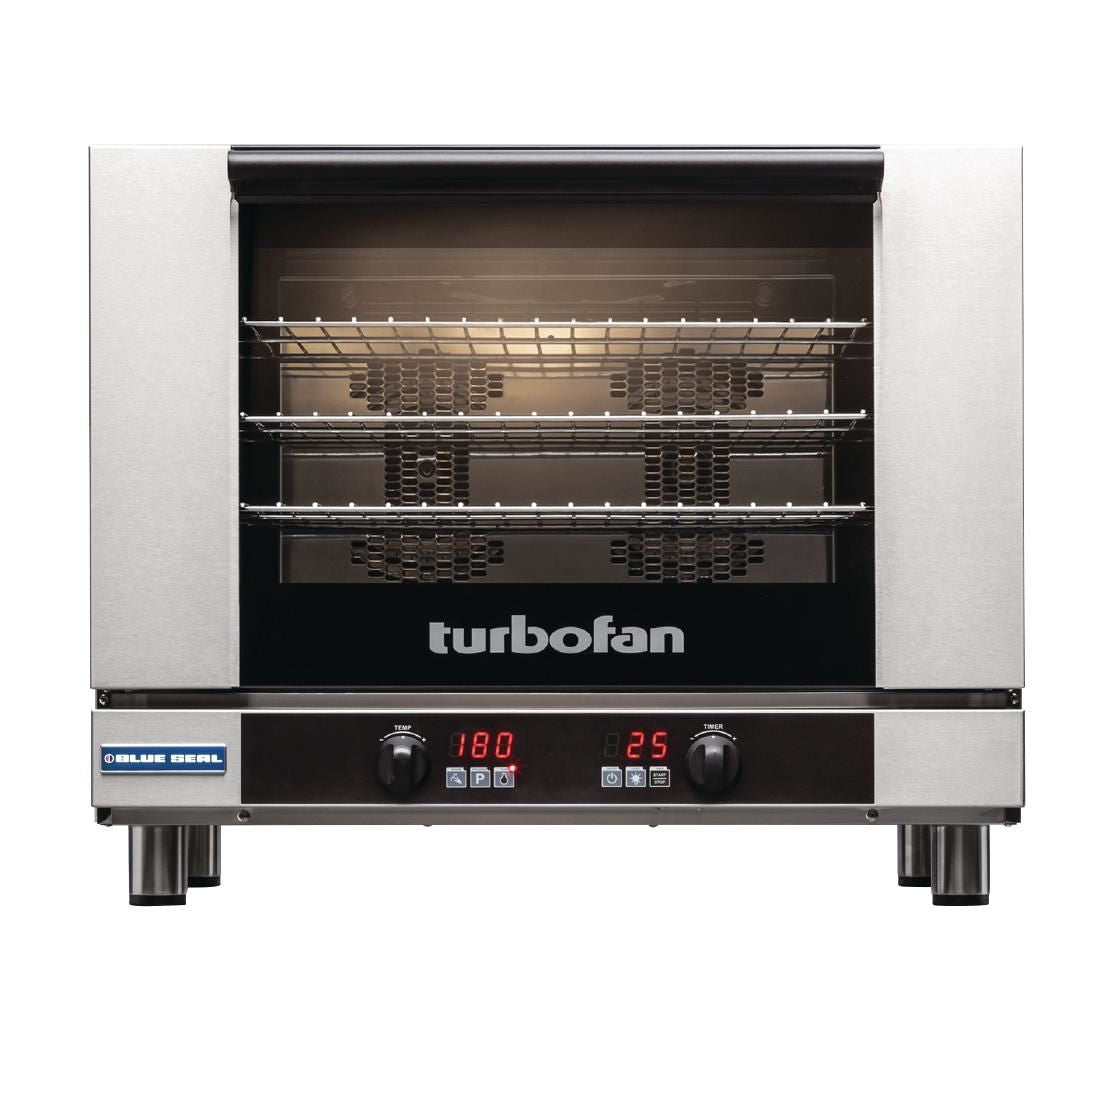 CP997 Blue Seal Turbofan Convection Oven E28D4 JD Catering Equipment Solutions Ltd